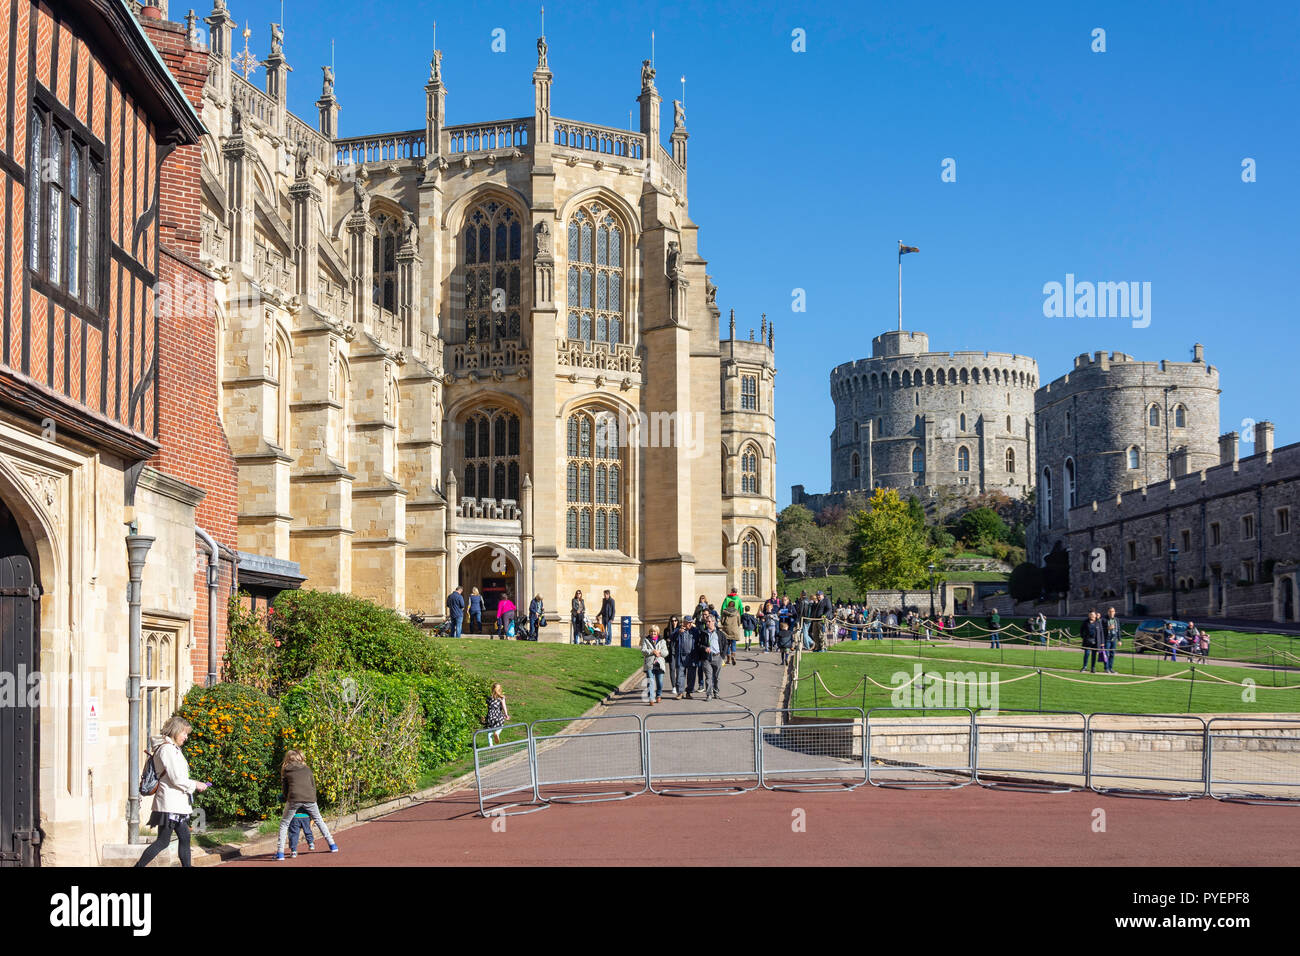 St George's Chapel and The Round Tower, Lower Ward, Windsor Castle, Windsor, Berkshire, England, United Kingdom Stock Photo